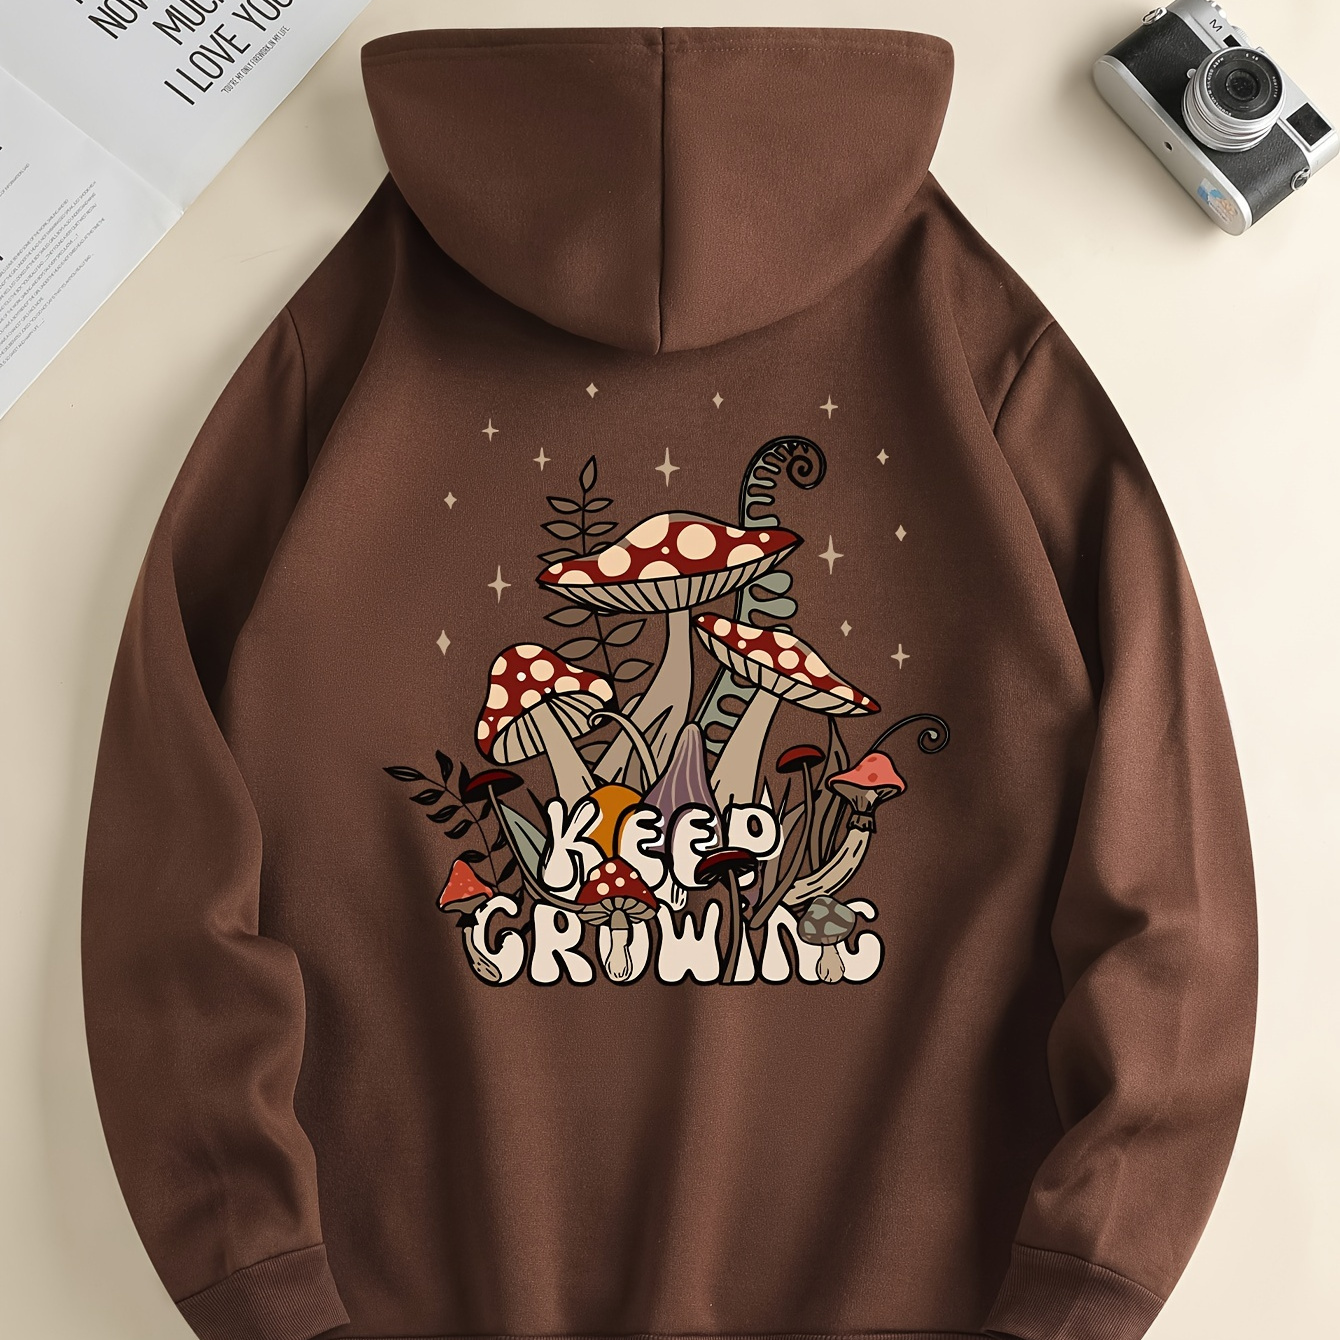 

Mushroom Print Men's Pullover Round Neck Hoodies With Kangaroo Pocket & Drawstring Long Sleeve Hooded Sweatshirt Loose Casual Top For Autumn Winter Men's Clothing As Gifts